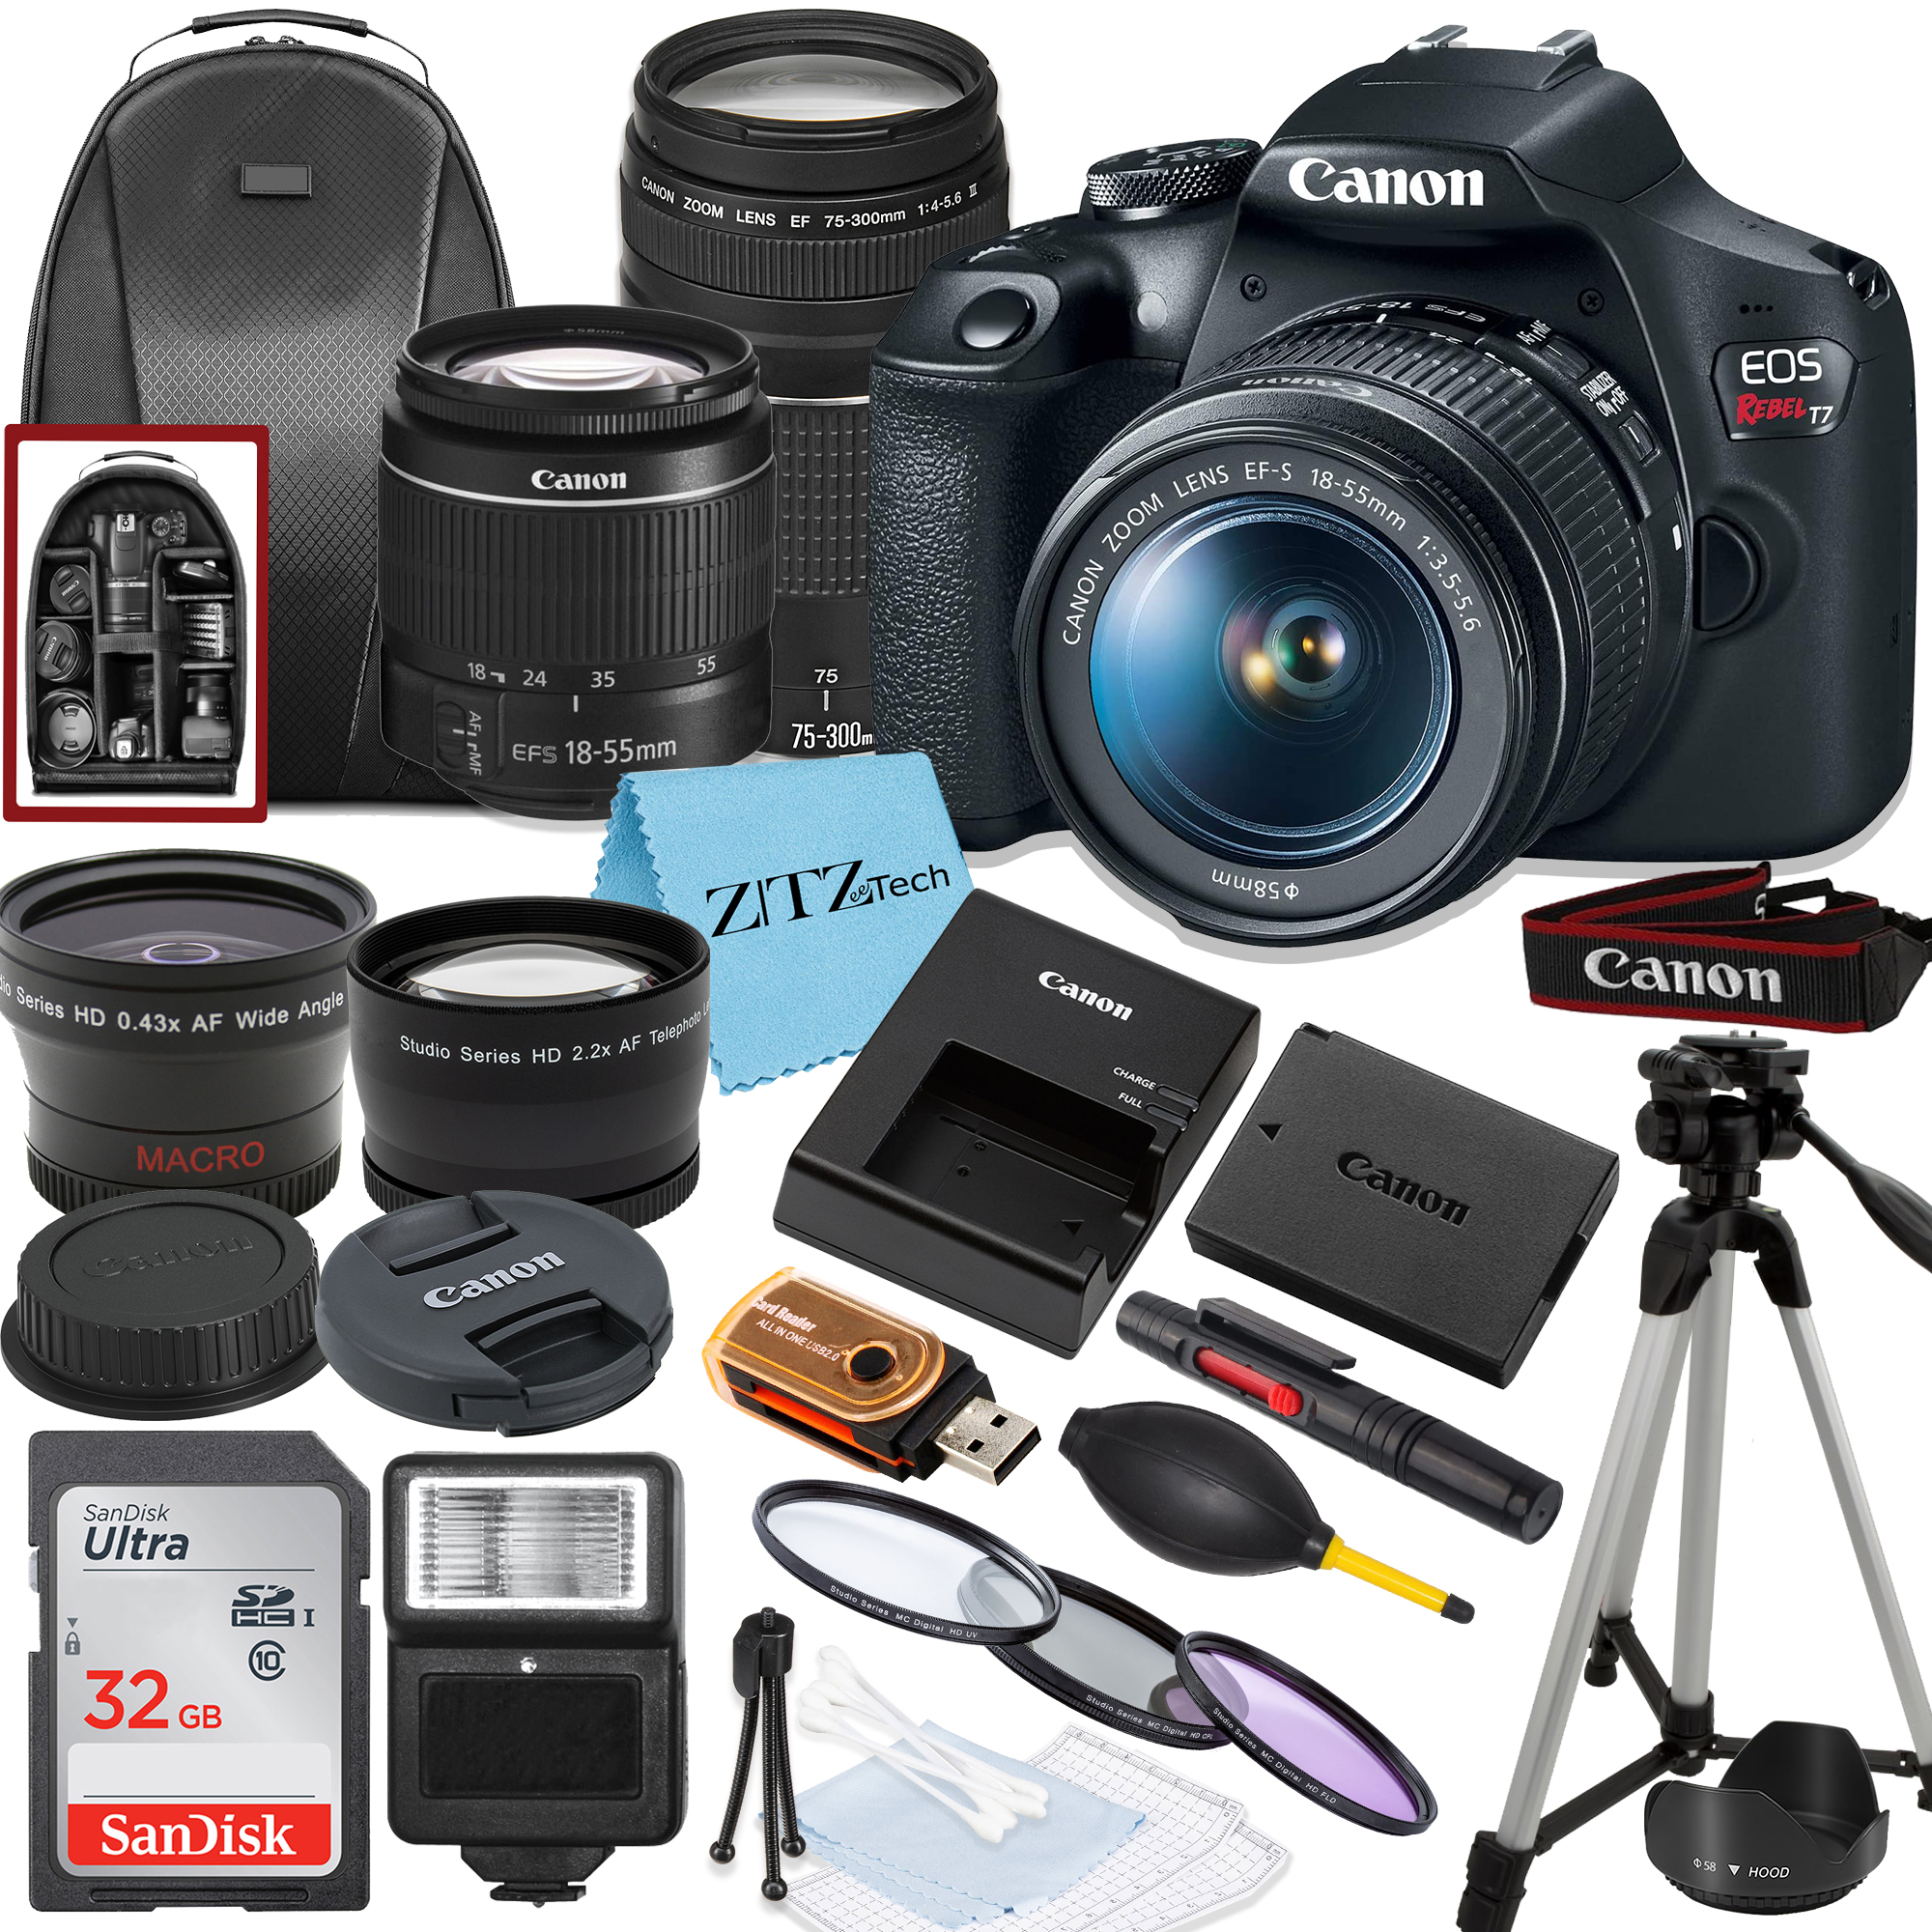 Canon EOS Rebel T7 Digital SLR Camera Bundle with 18-55mm, 75-300mm Lens, SanDisk 32GB Memory Card, Tripod, Flash, Deluxe Backpack and ZeeTech Accessory Bundle